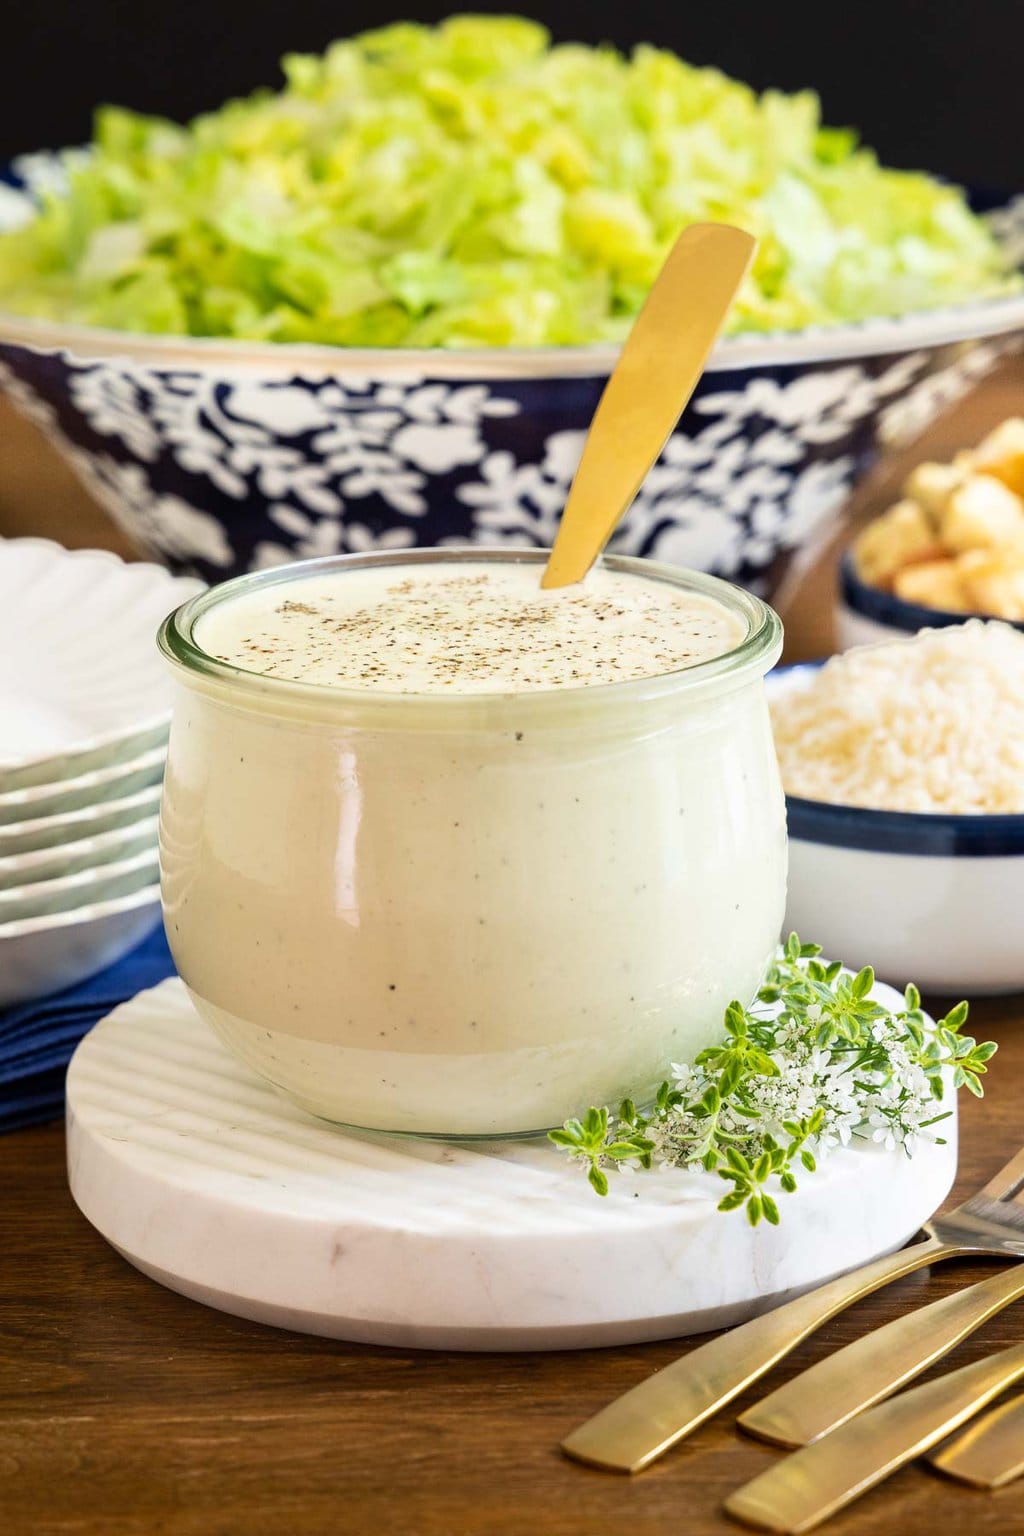 Vertical closeup photo of a Weck jar of Ridiculously Easy Caesar Dressing with a caesar salad in the background.